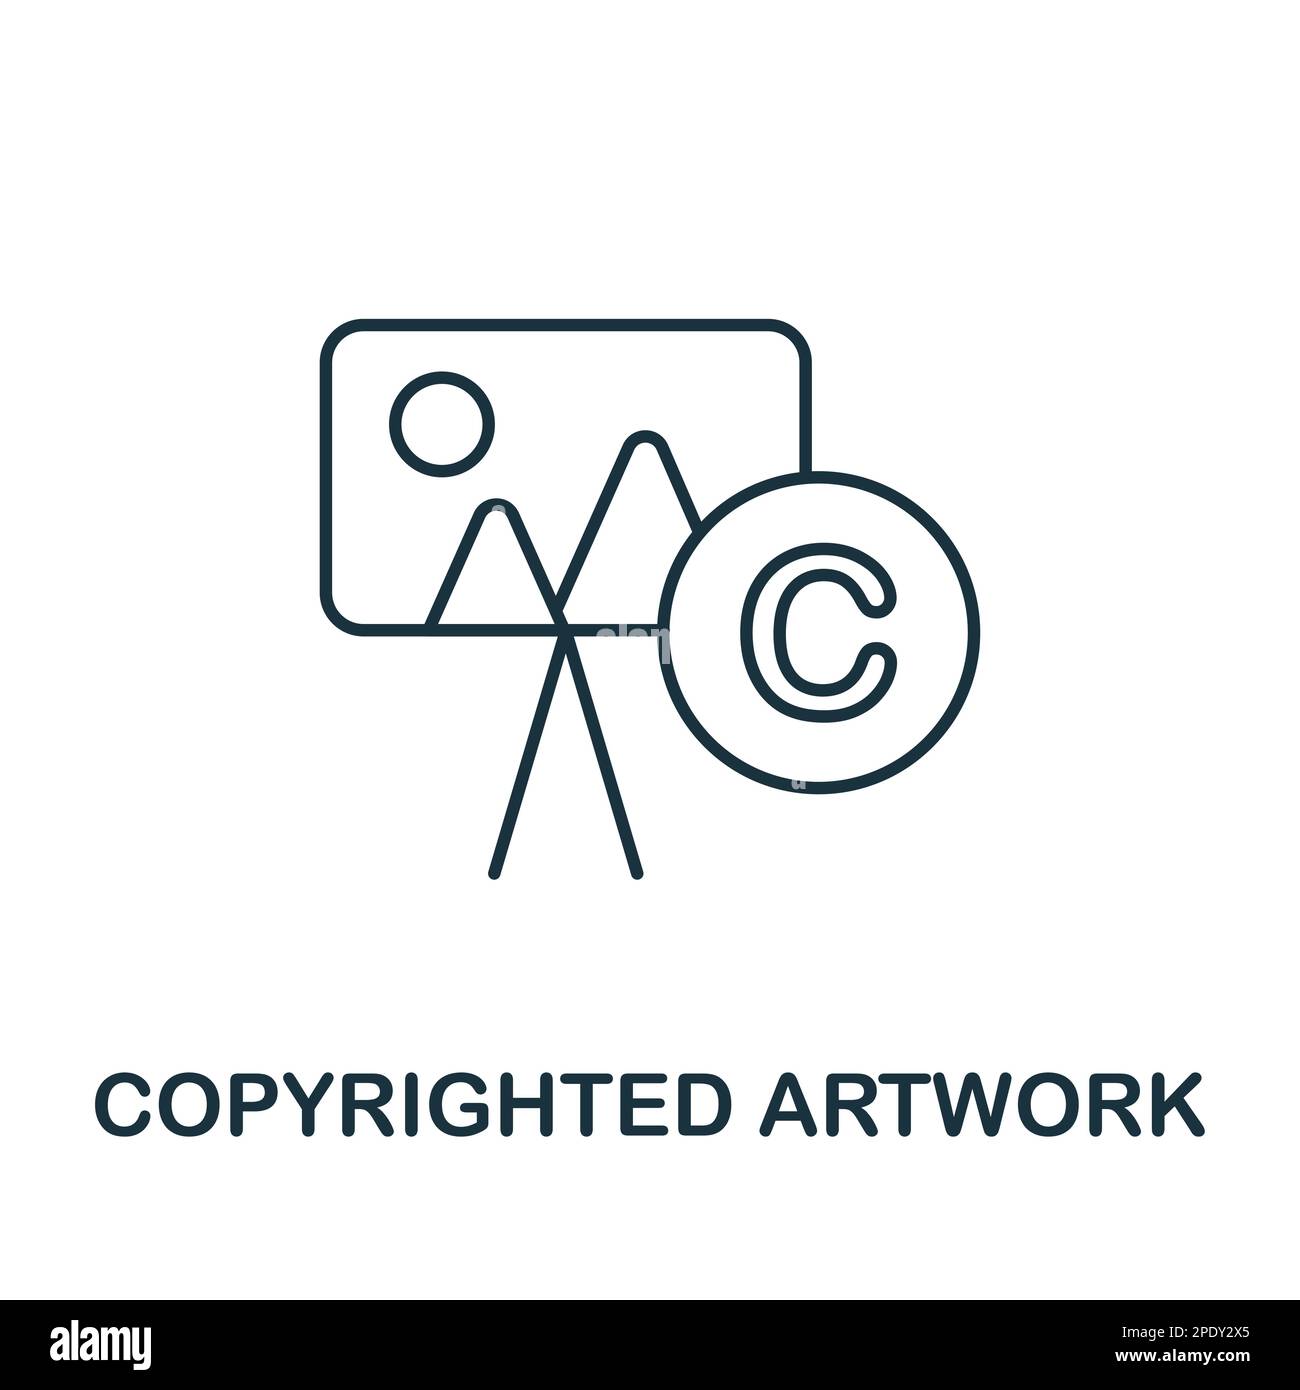 Copyrighted Artwork outline icon. Monochrome simple Copyrighted Artwork line icon for templates, web design and infographics Stock Vector